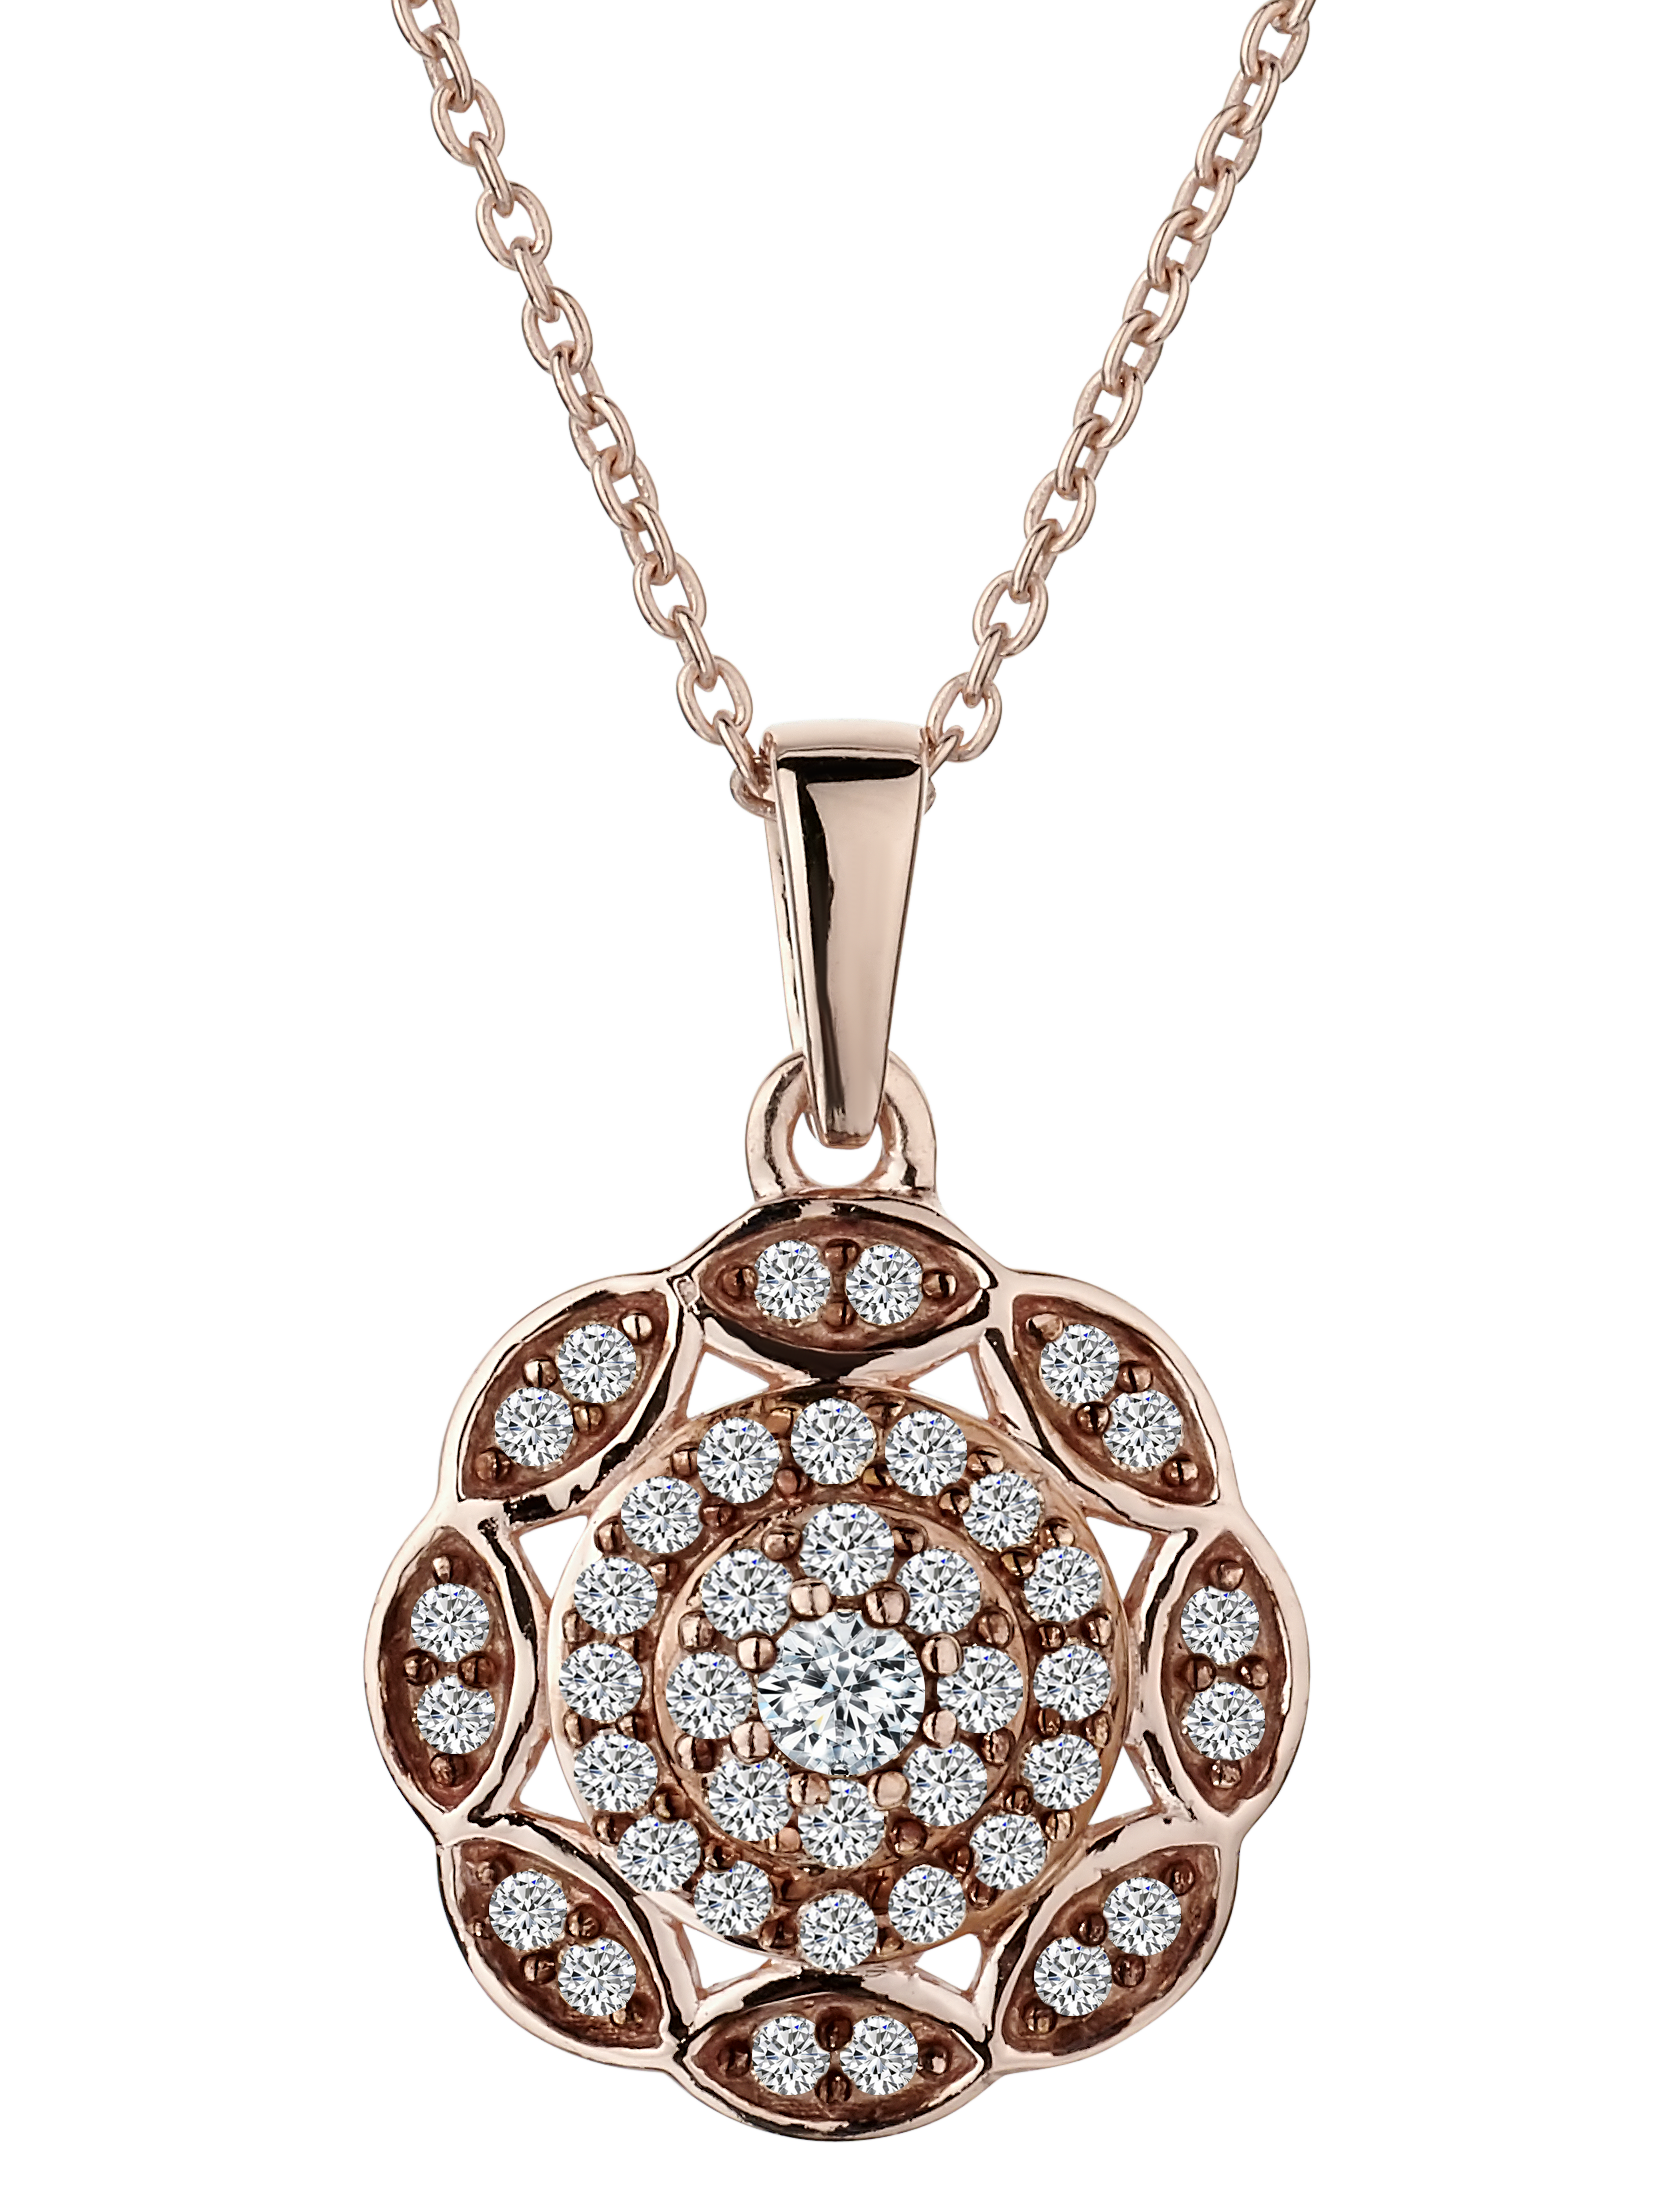 .50 Carat Champagne Flower Diamond Pendant,  Sterling Silver (18kt Rose Gold Plated). Necklaces and Pendants. Griffin Jewellery Designs. 